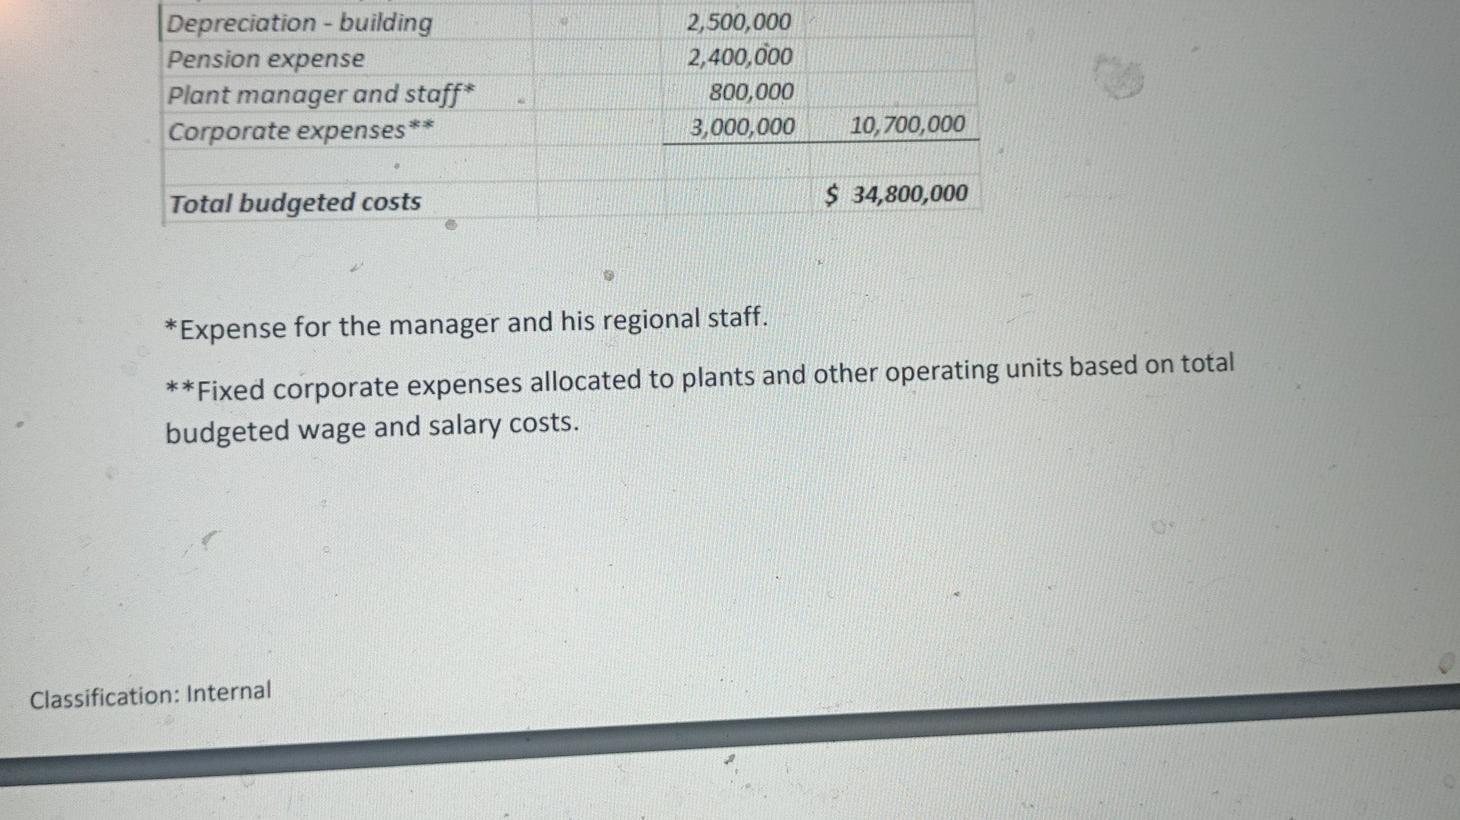 Depreciation - buildingPension expensePlant manager and staff*Corporate expenses2,500,0002,400,000800,0003,000,000**